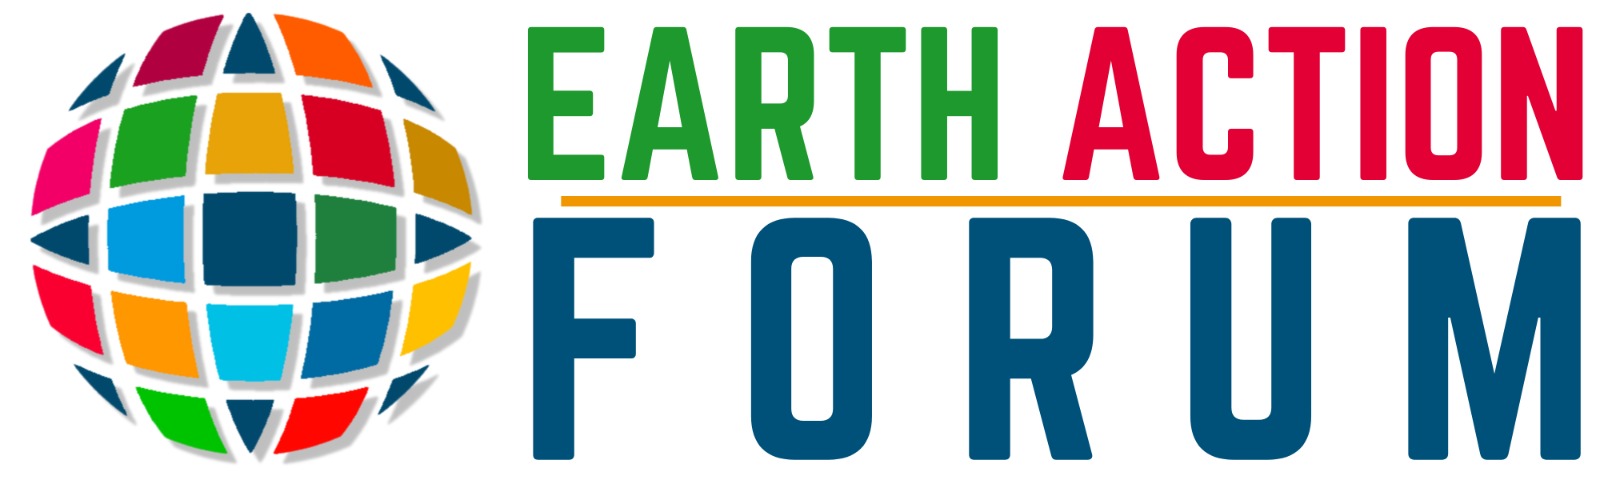 Earth Action Forum